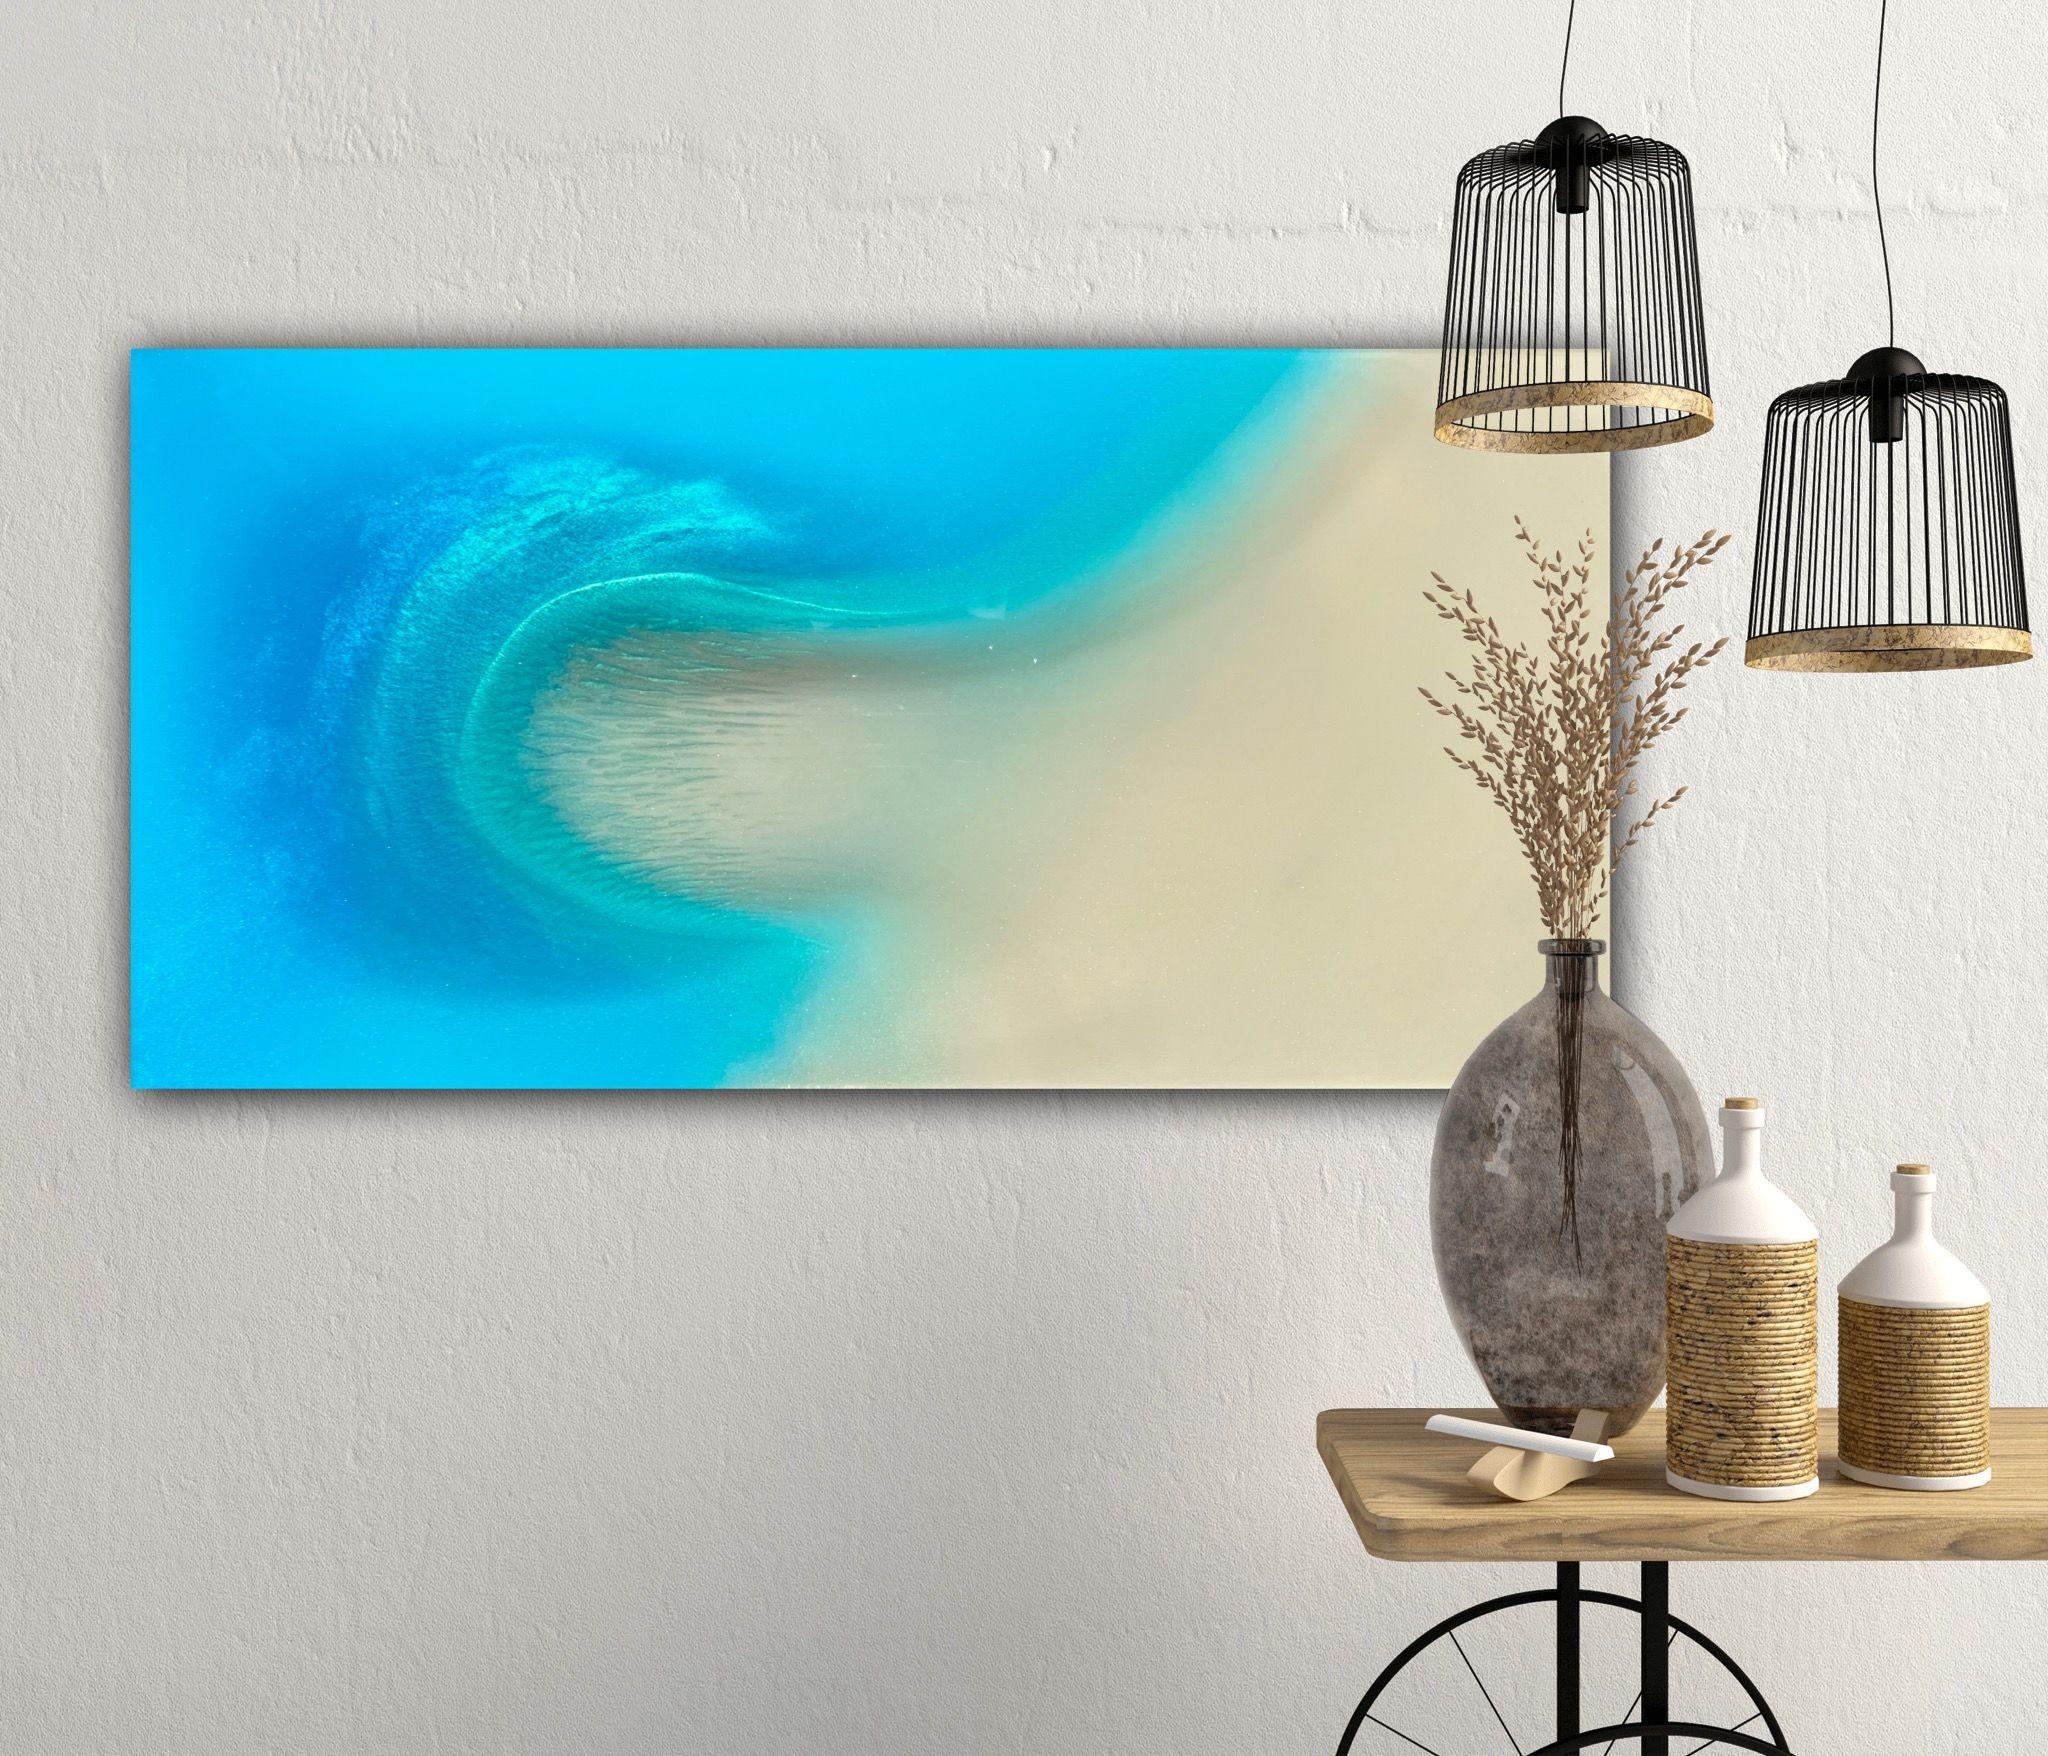 Original Mixed Media ocean painting     Unique ocean painting with white sand beach and frothy splashing waves, inspired by The Turks And Caicos Islands    Different shades of blue, green, turquoise, teal, aqua, copper and gold  This painting does